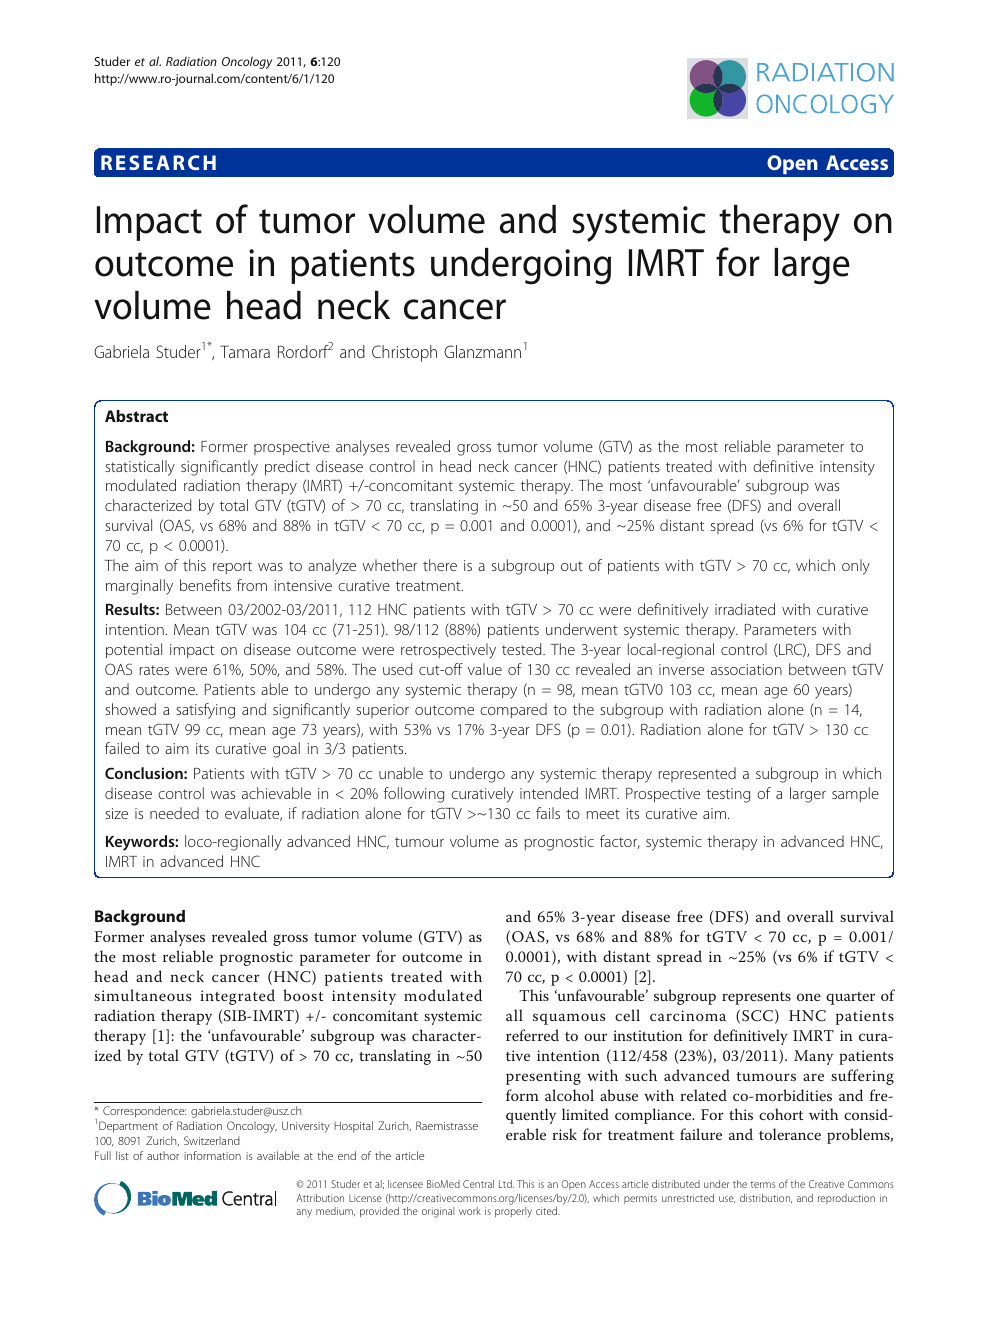 Impact Of Tumor Volume And Systemic Therapy On Outcome In Patients Undergoing Imrt For Large Volume Head Neck Cancer Topic Of Research Paper In Clinical Medicine Download Scholarly Article Pdf And